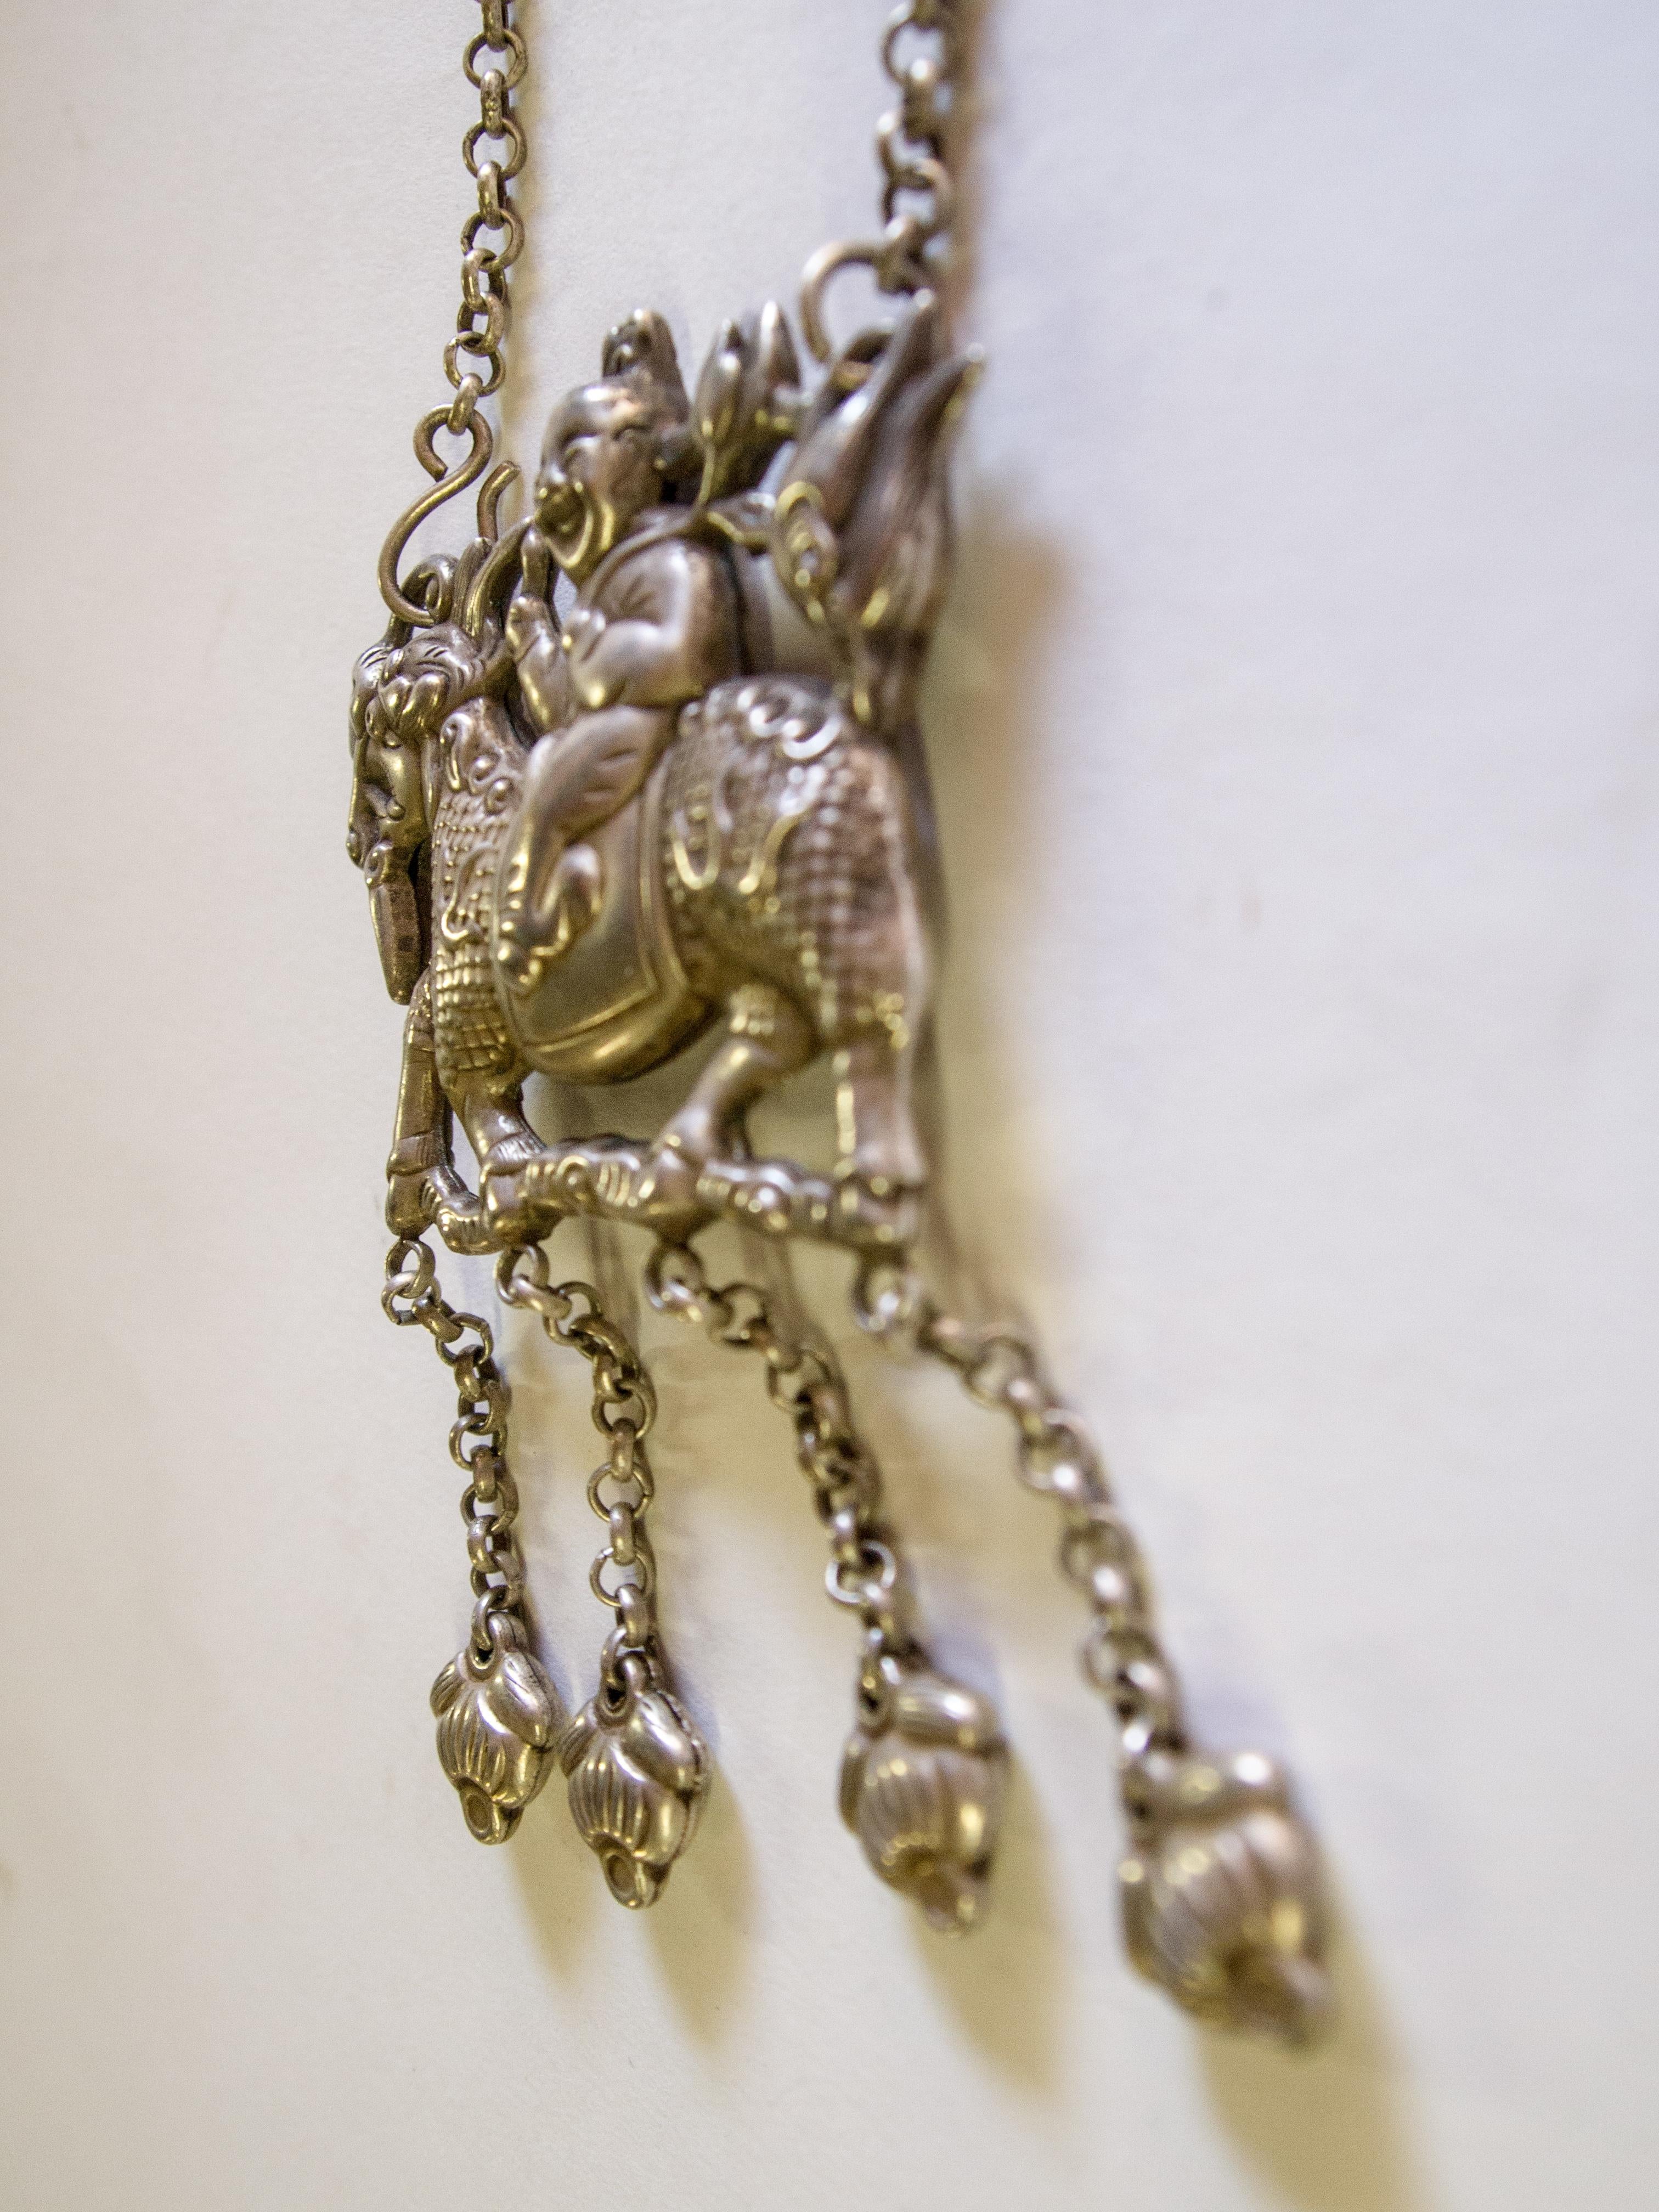 Hand-Crafted Qilin Amulet Necklace, Silver Alloy, Southwest China, Early 20th Century